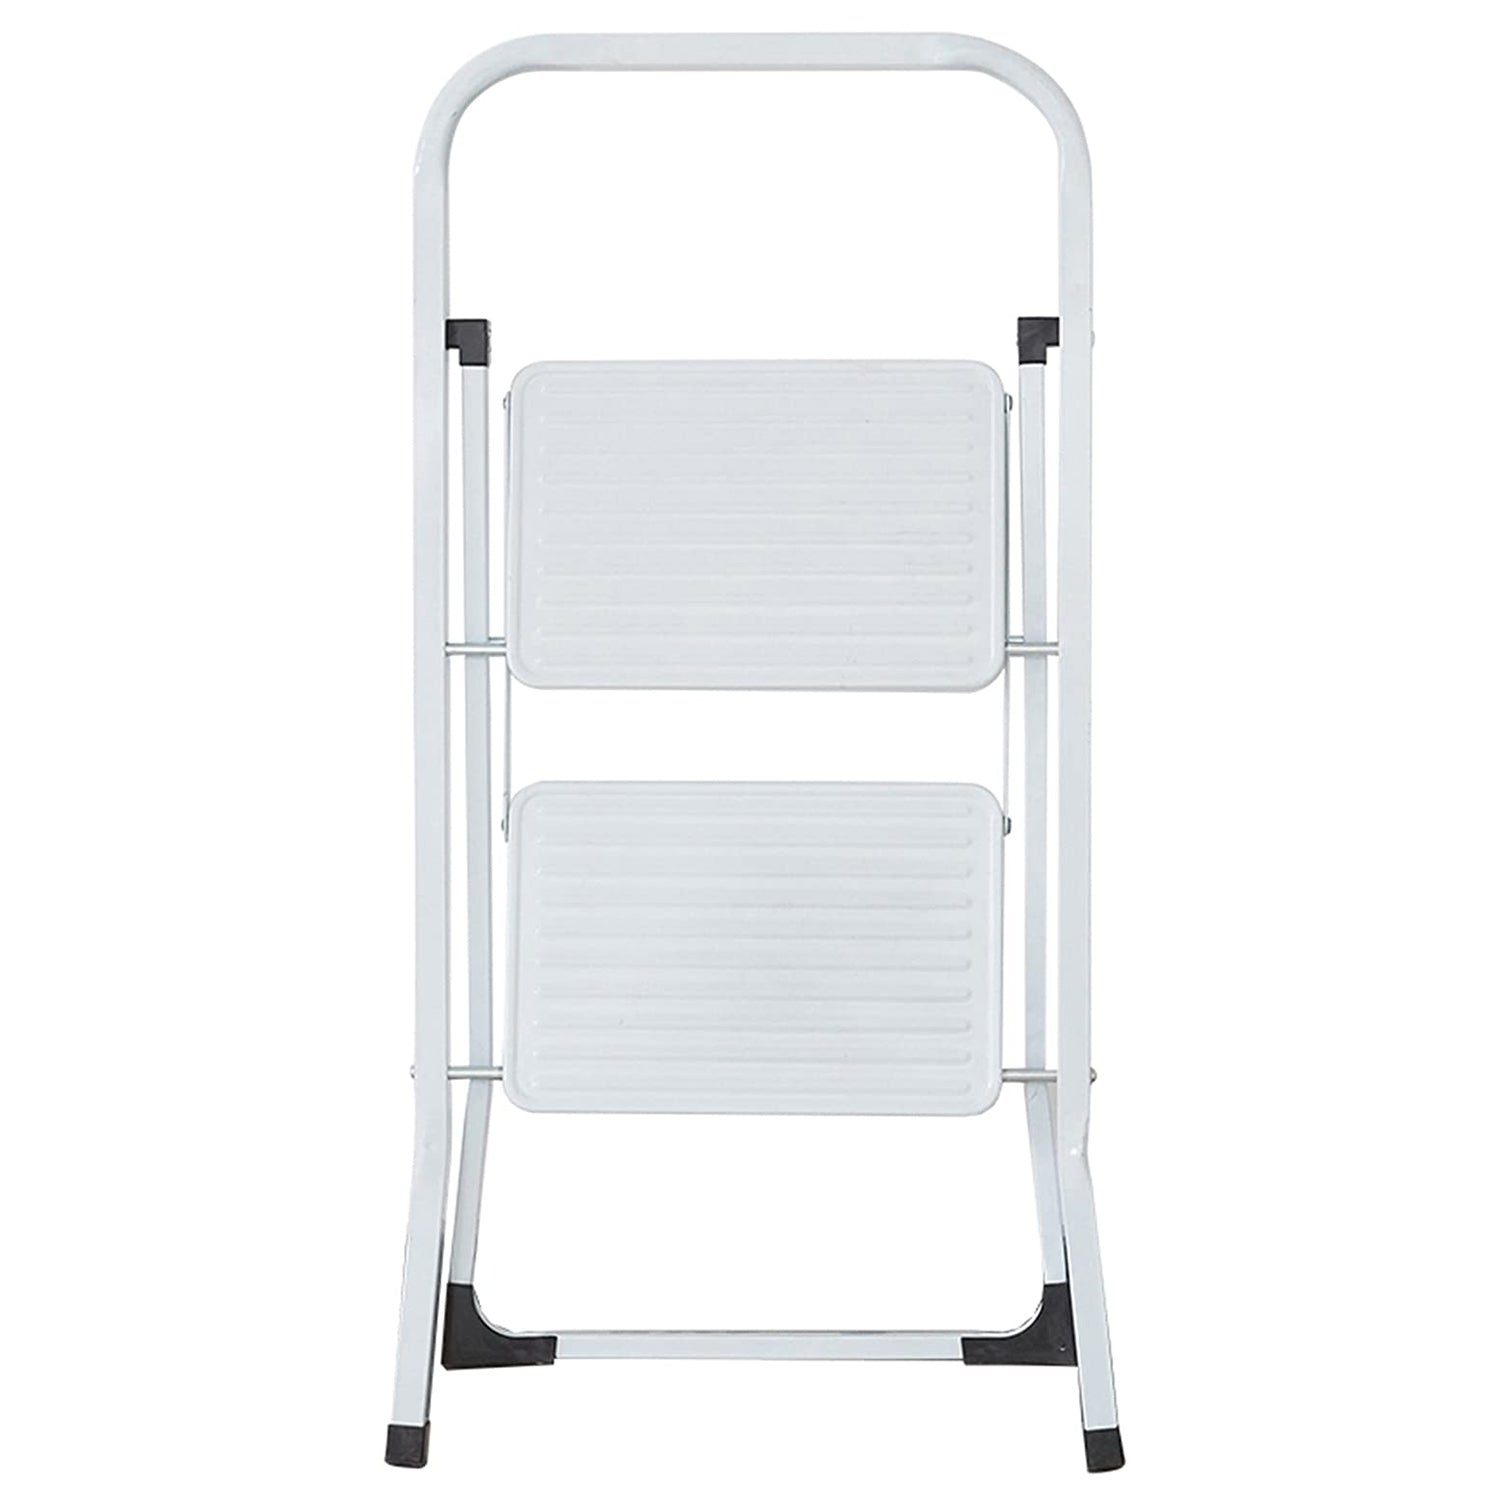 2-Step Ladder Folding Step Stool 330lbs Capacity for Adults Home Kitchen Household White